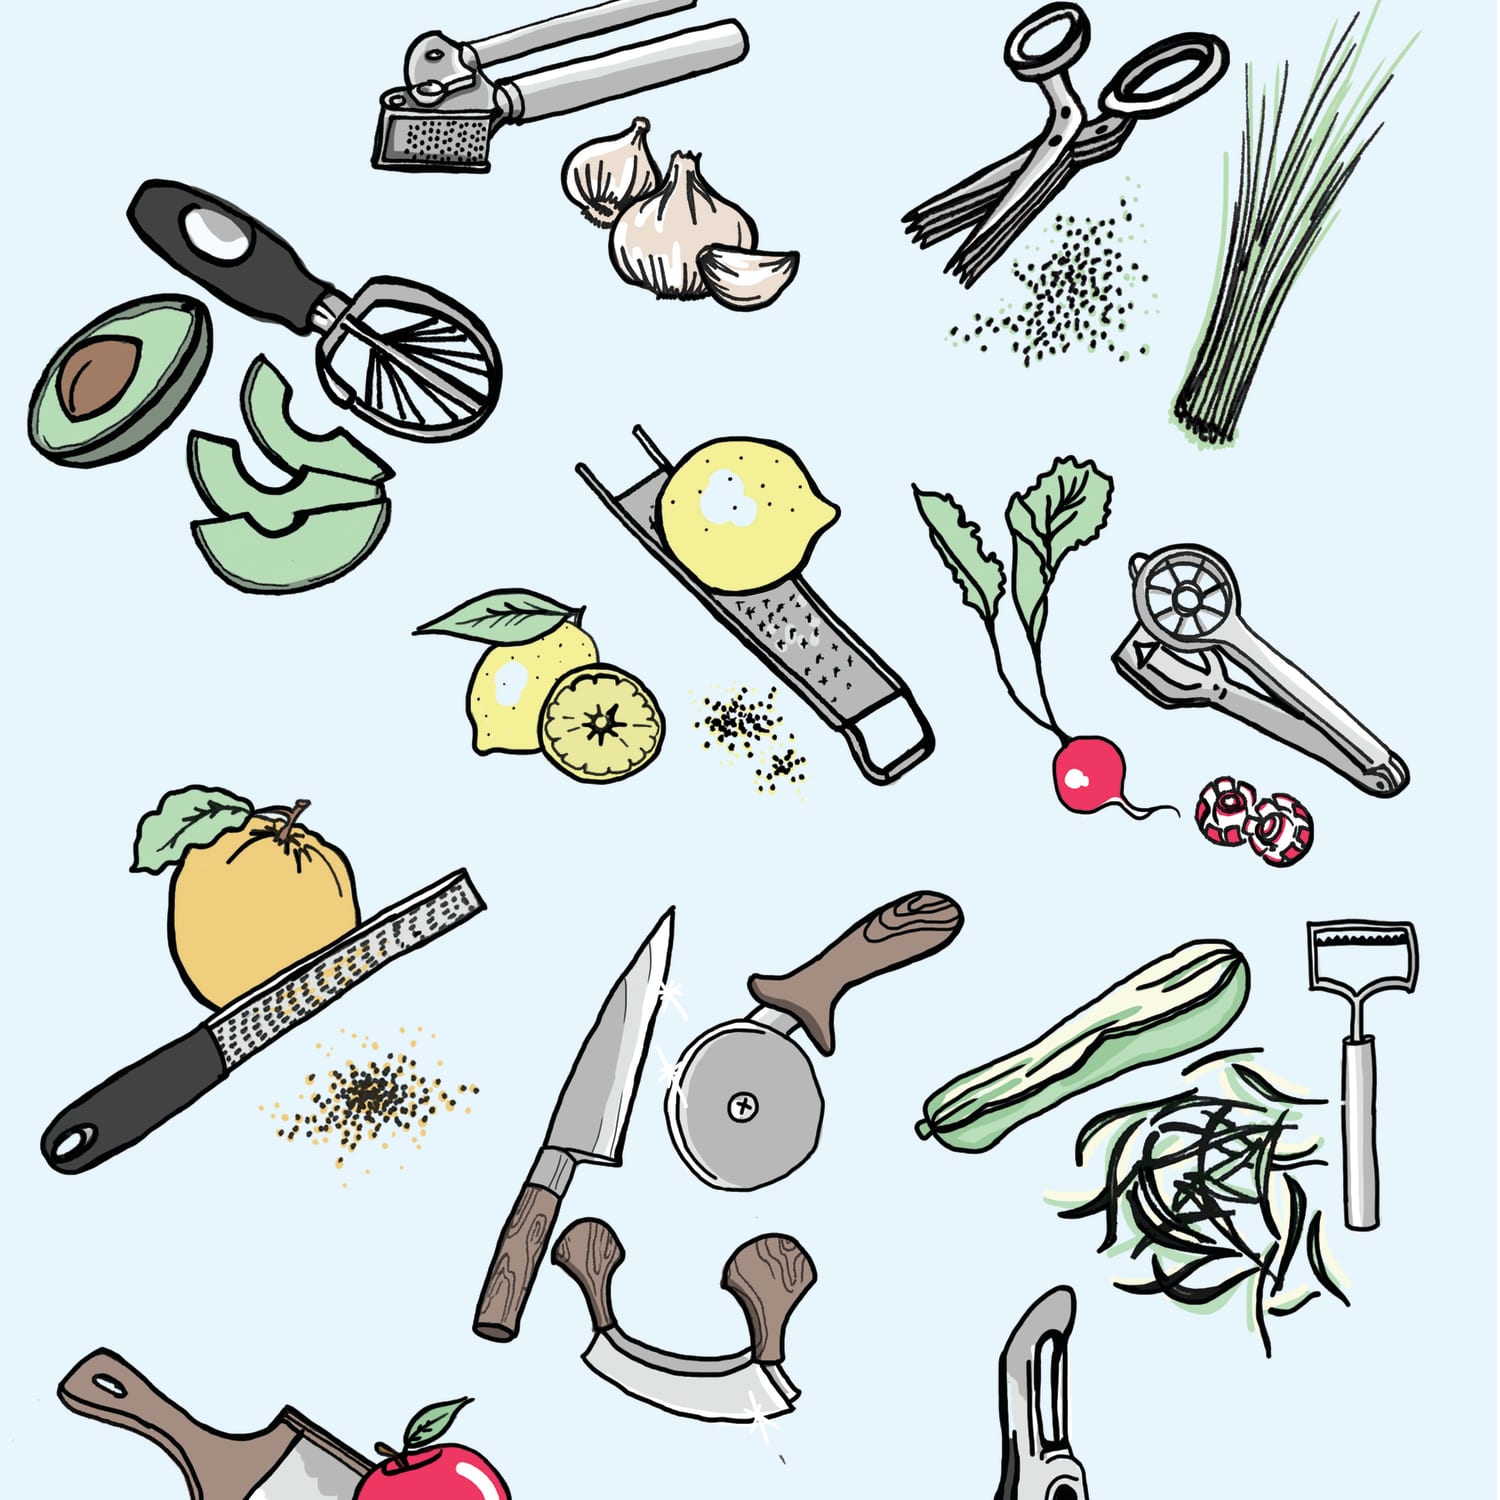 Kitchen tools for vegetables so you can easily prep for summer